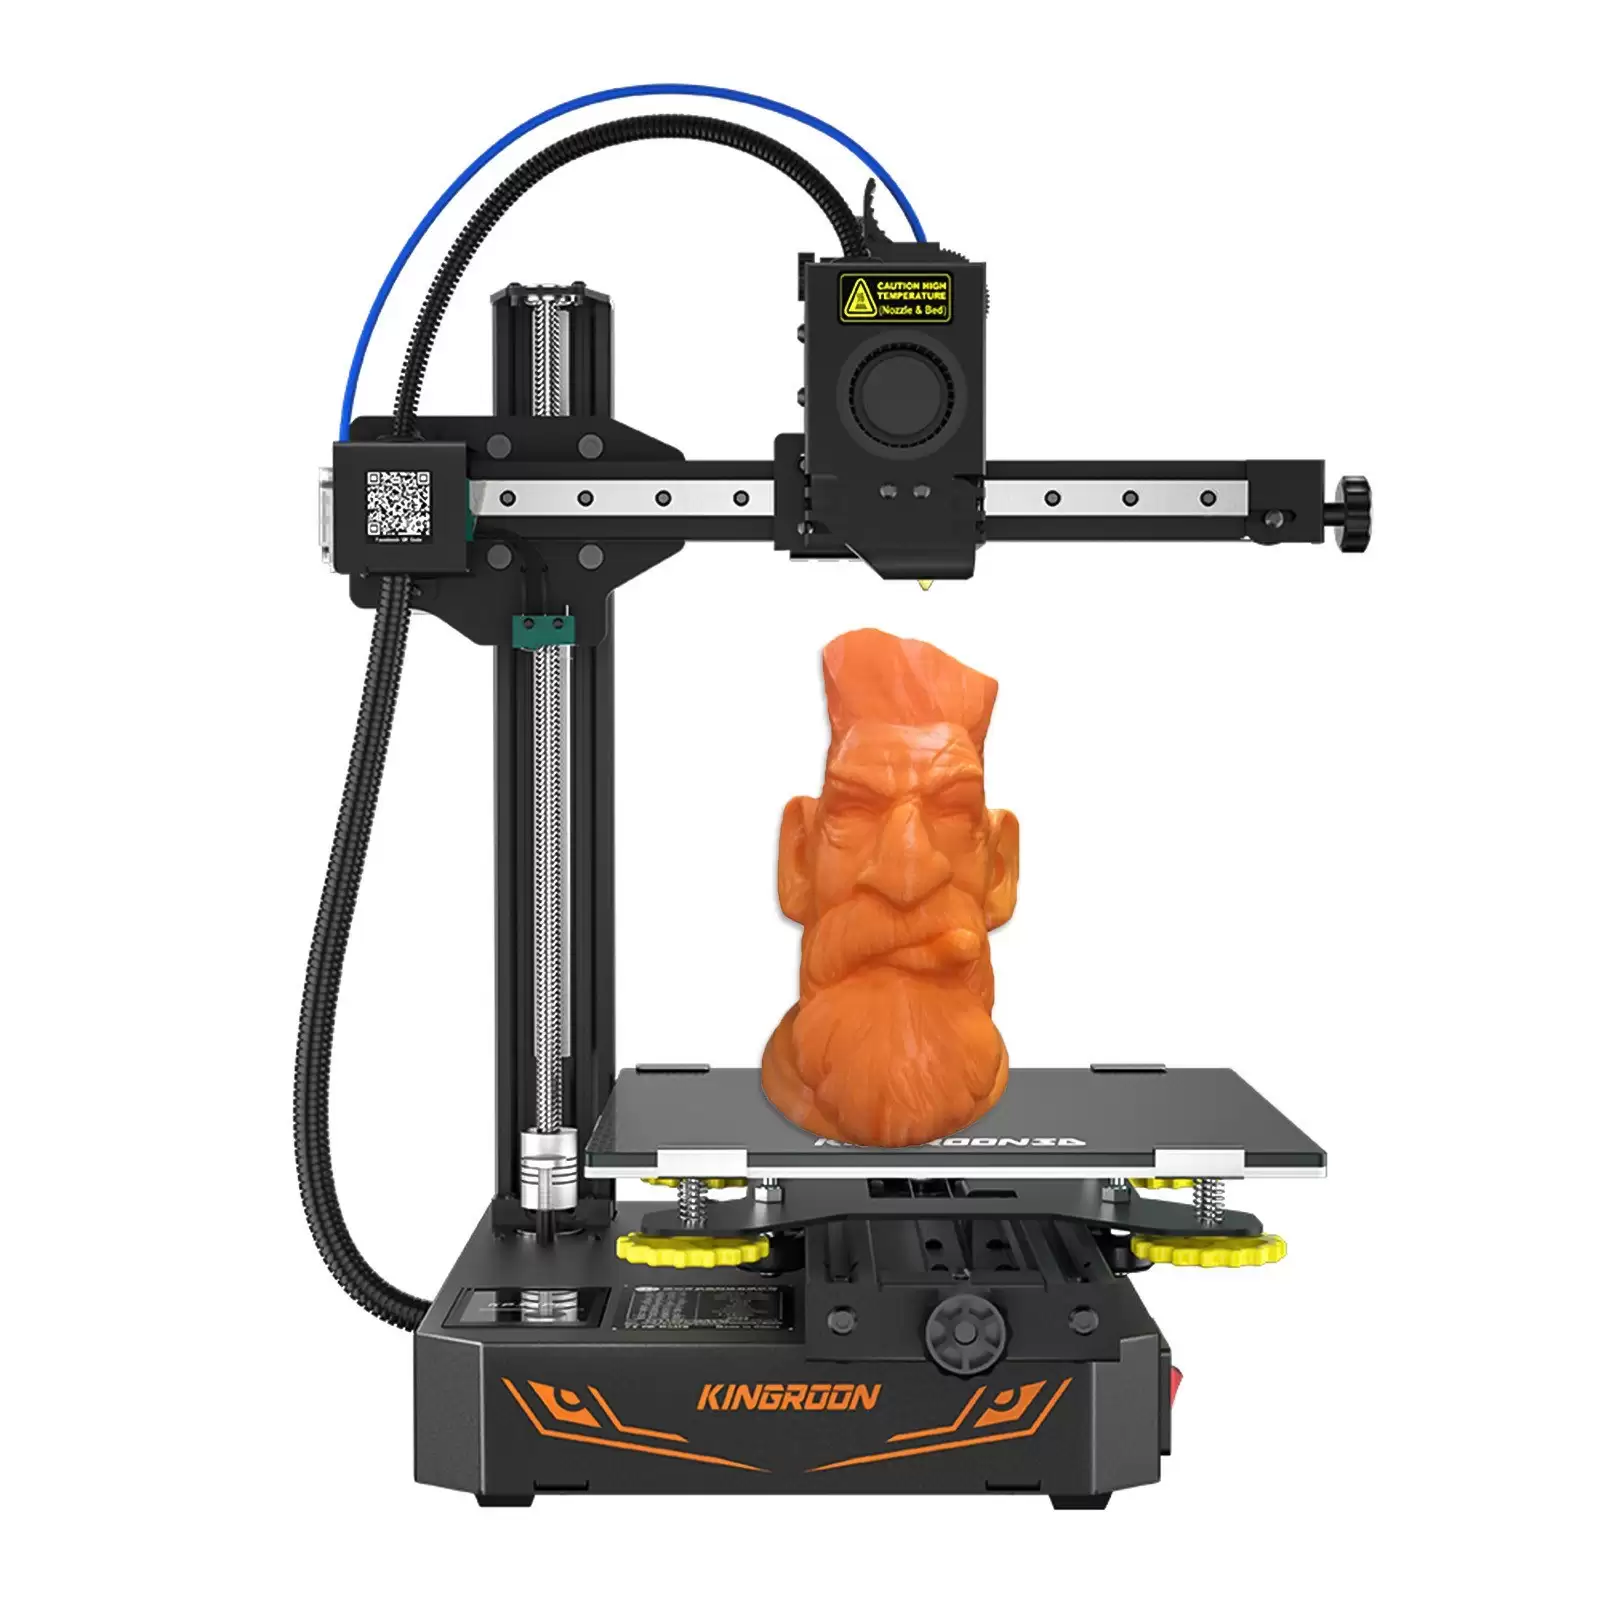 Order In Just $189 Kingroon Kp3s Pro 3d Printer With Titan Extruder With This Tomtop Discount Voucher